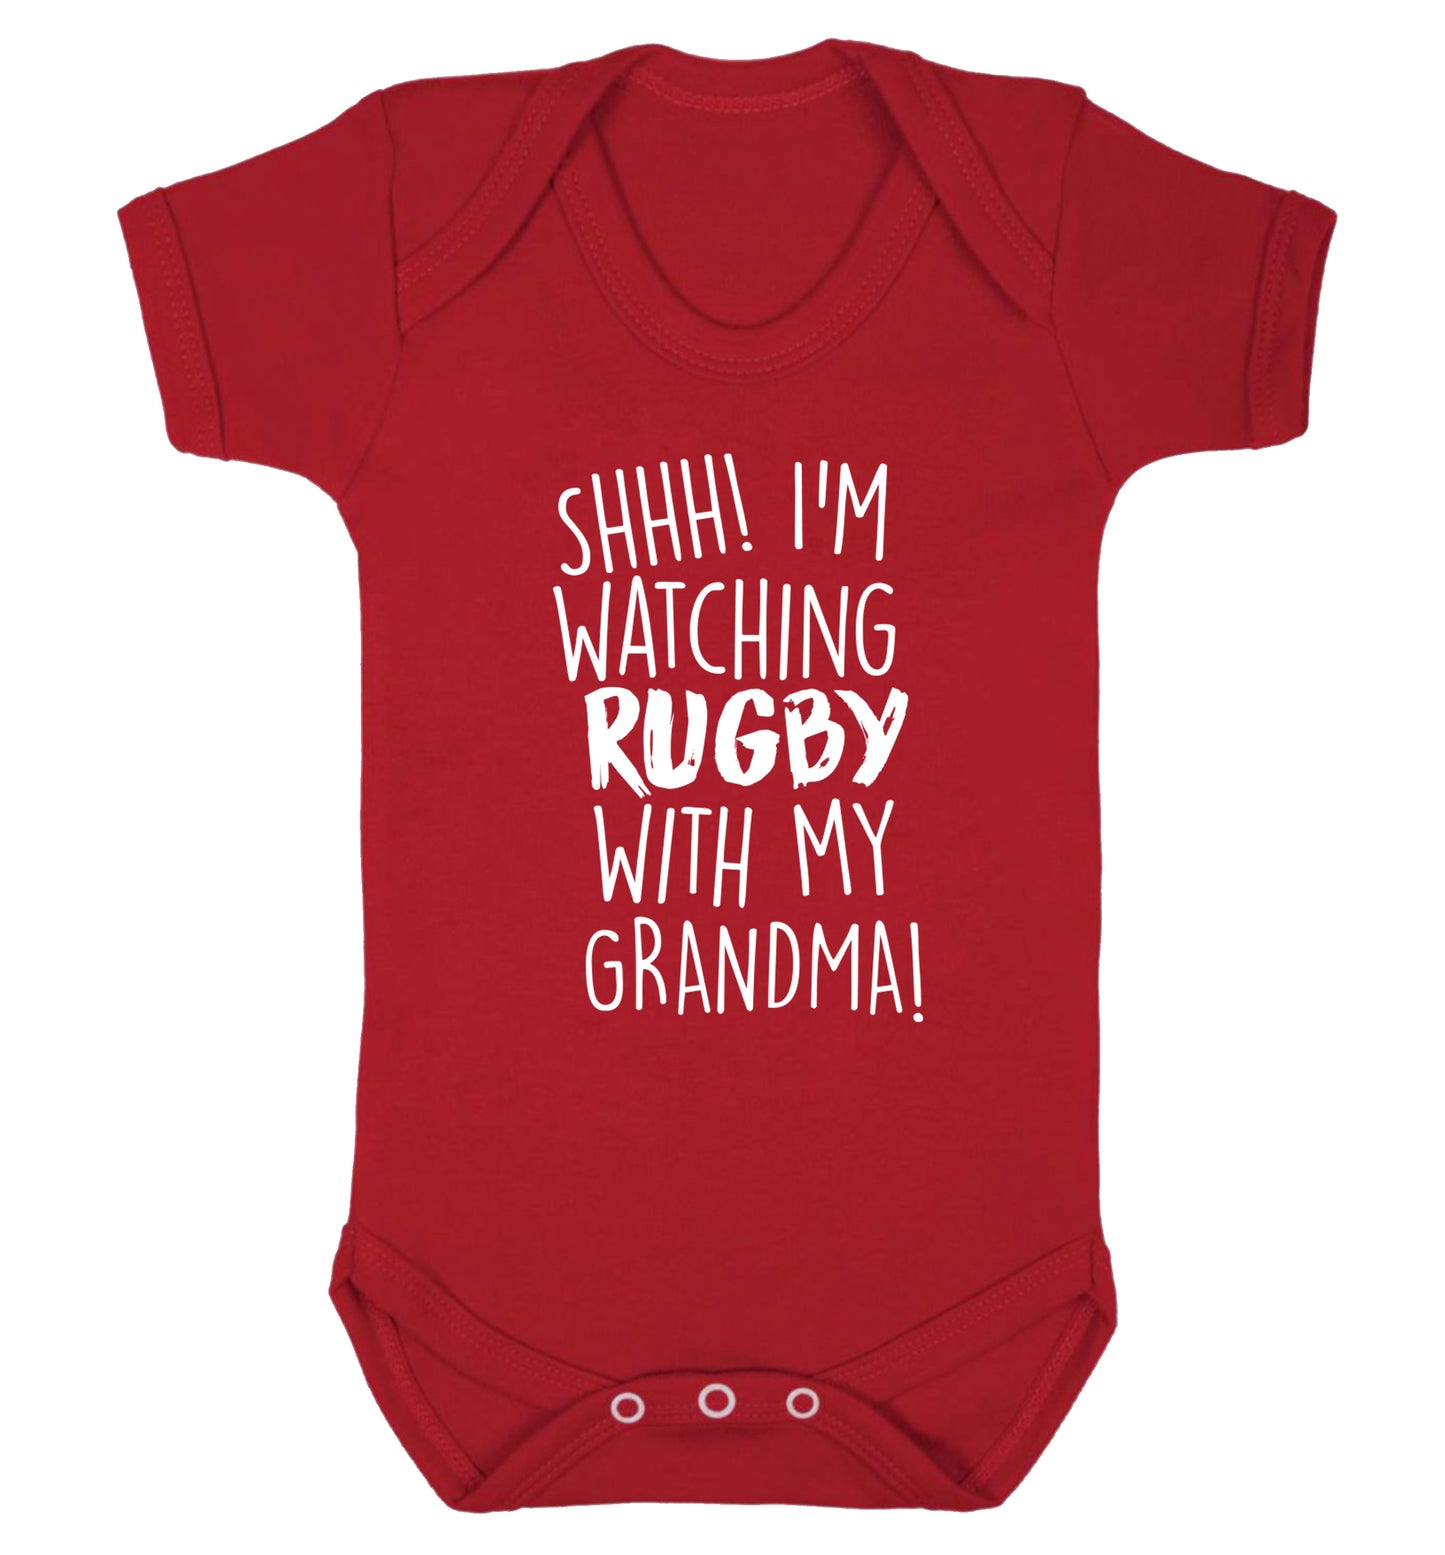 Shh I'm watching rugby with my grandma Baby Vest red 18-24 months